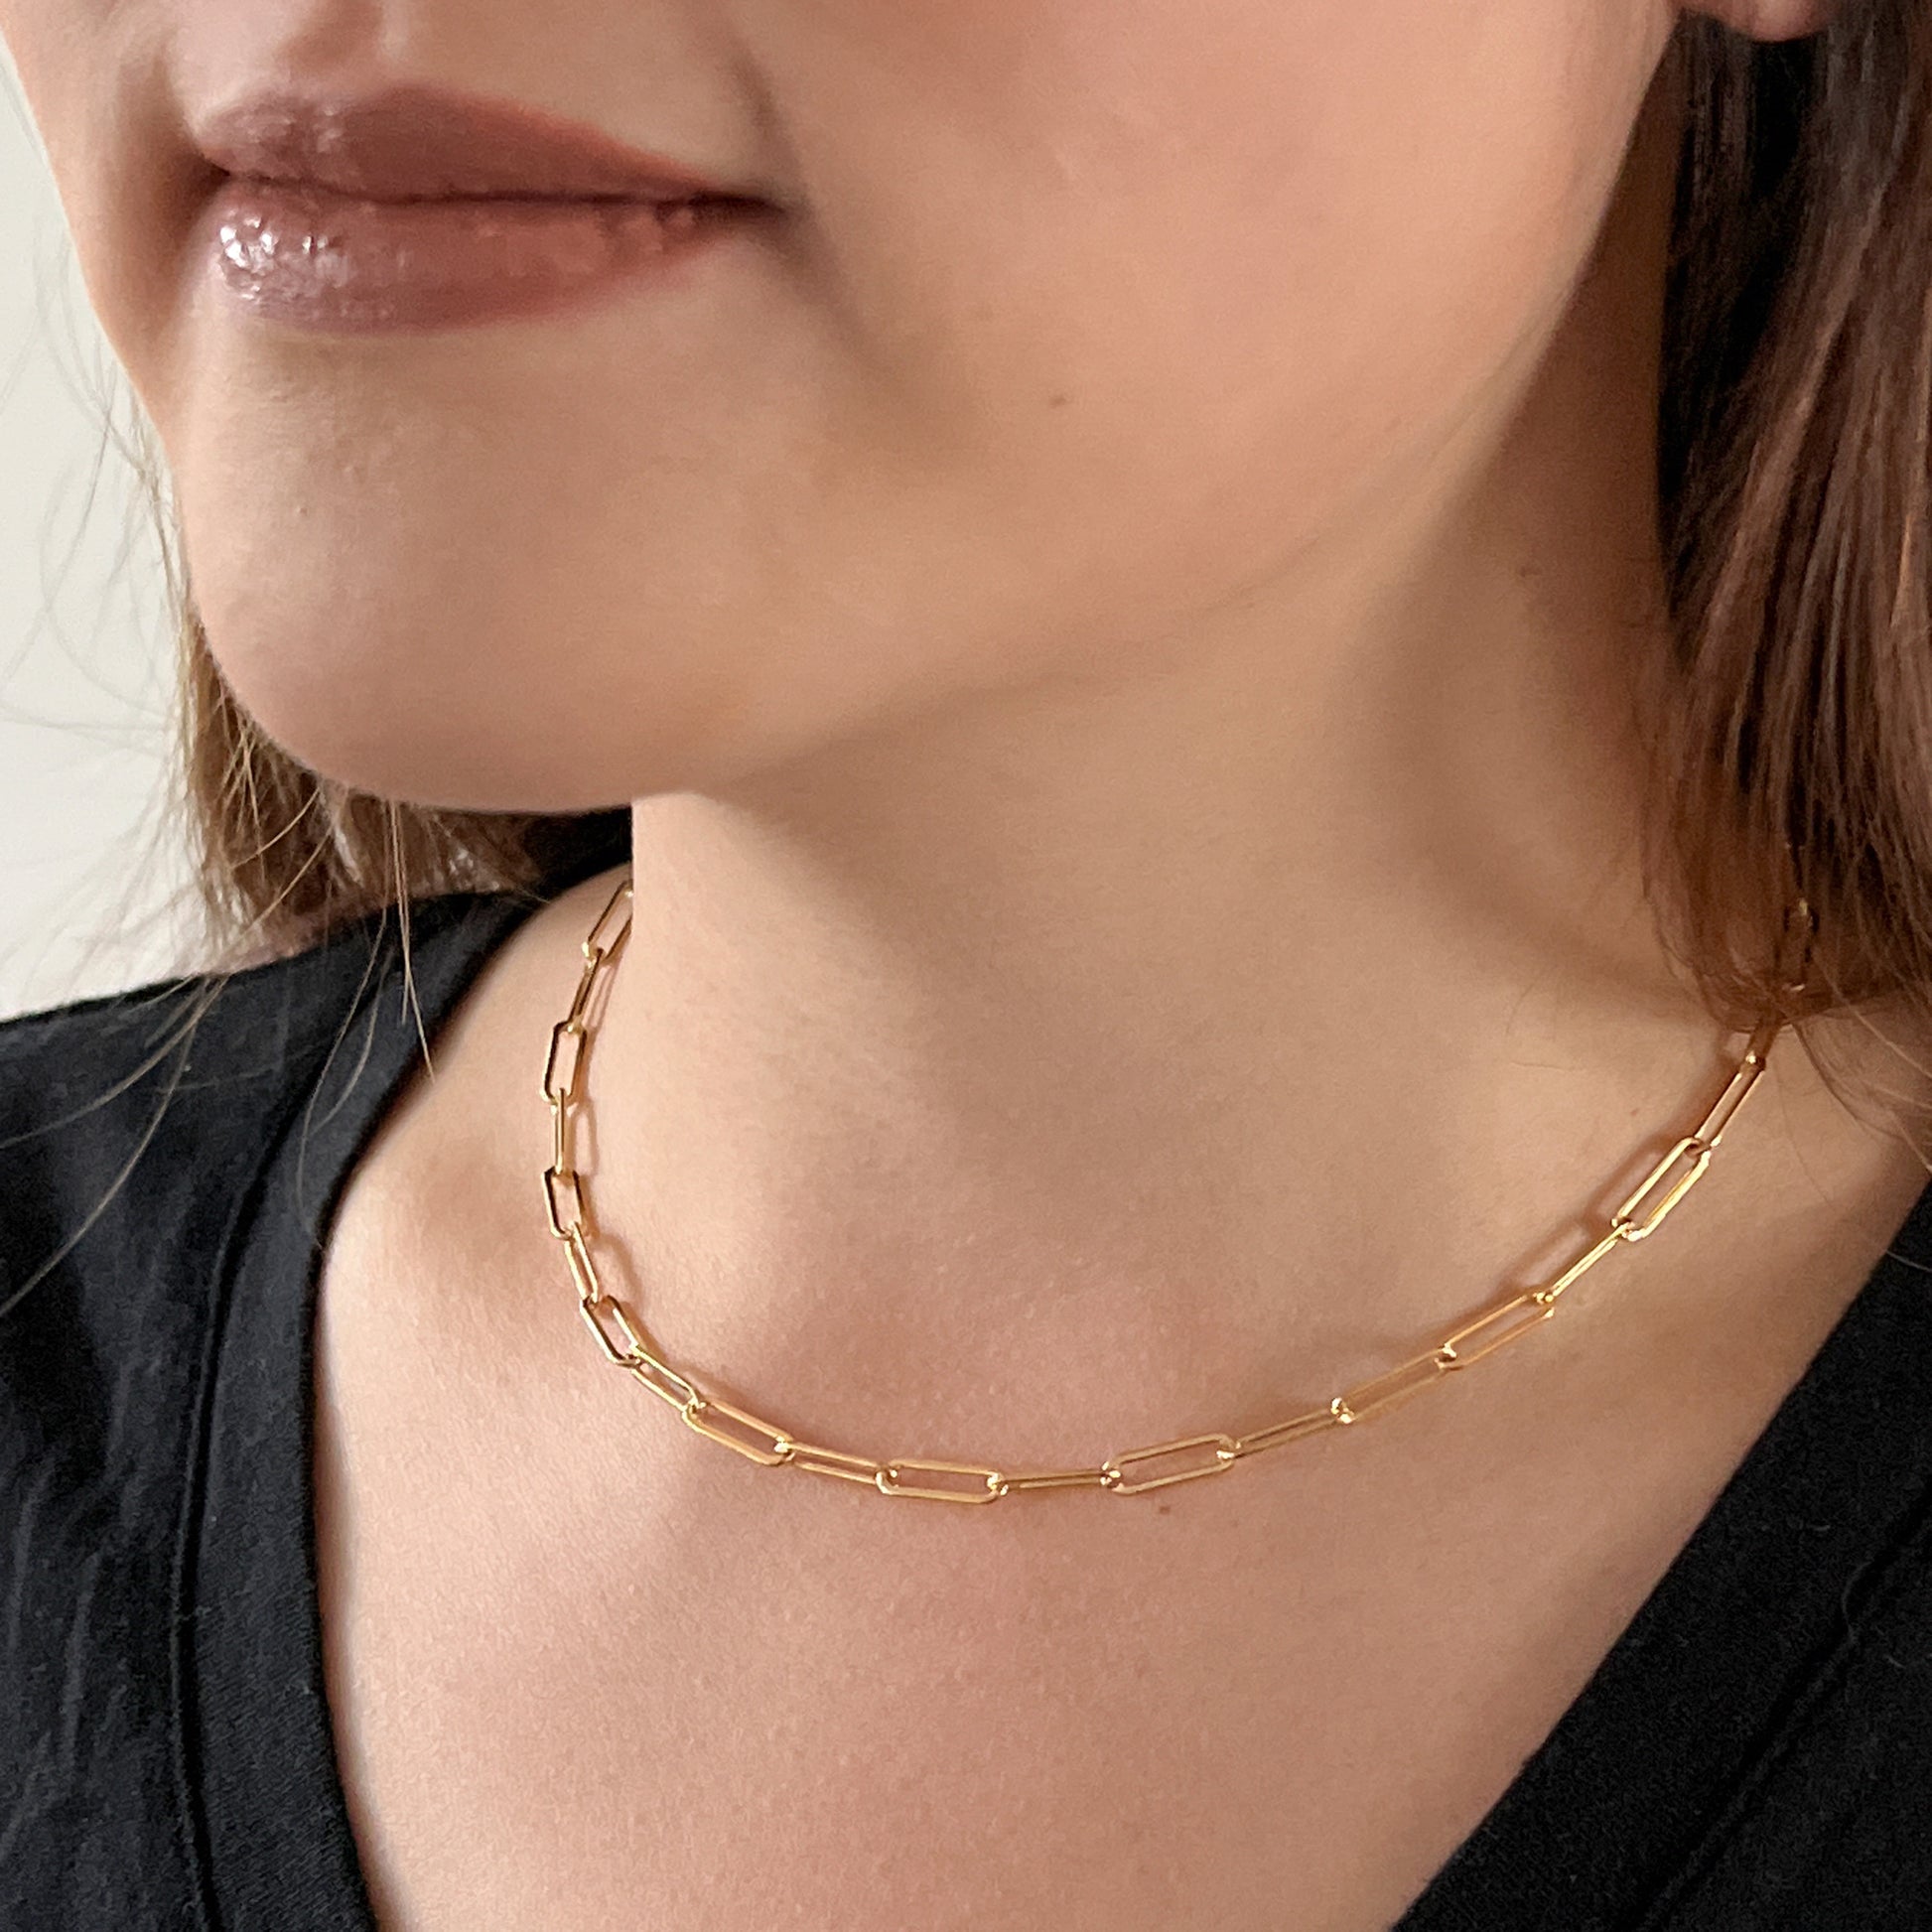 modeled paperclip chain necklace